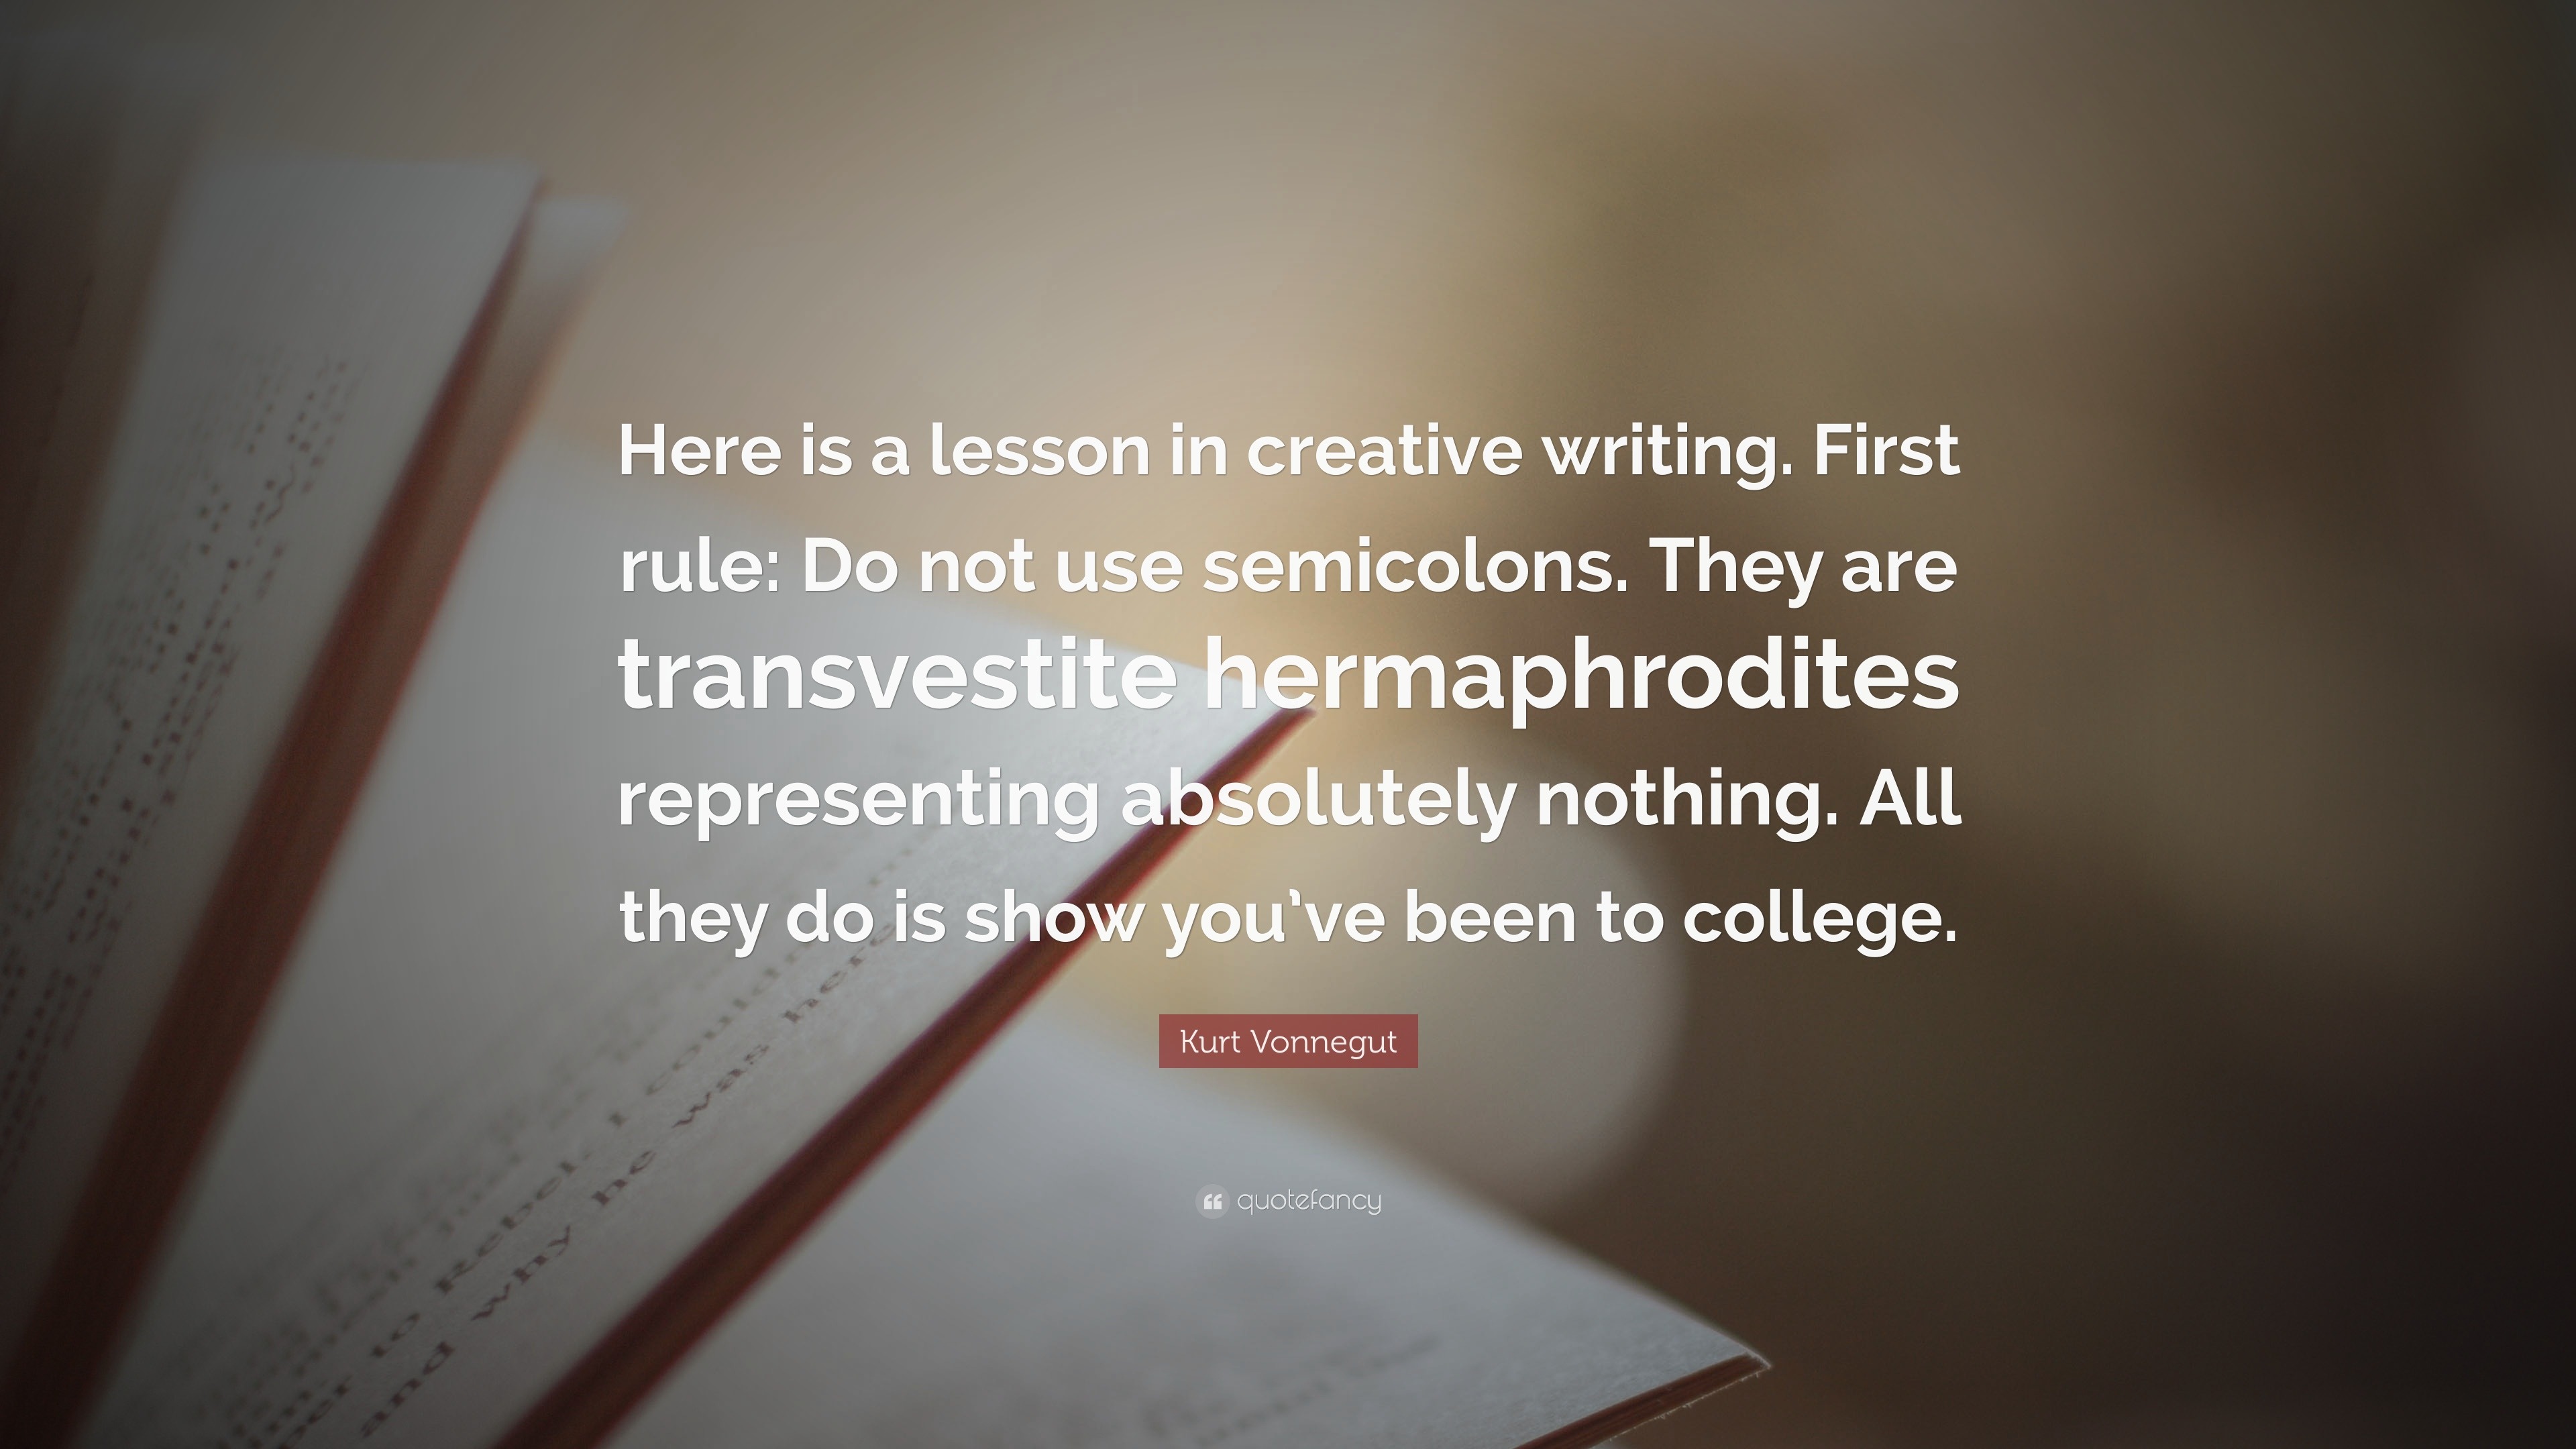 here is a lesson in creative writing by kurt vonnegut